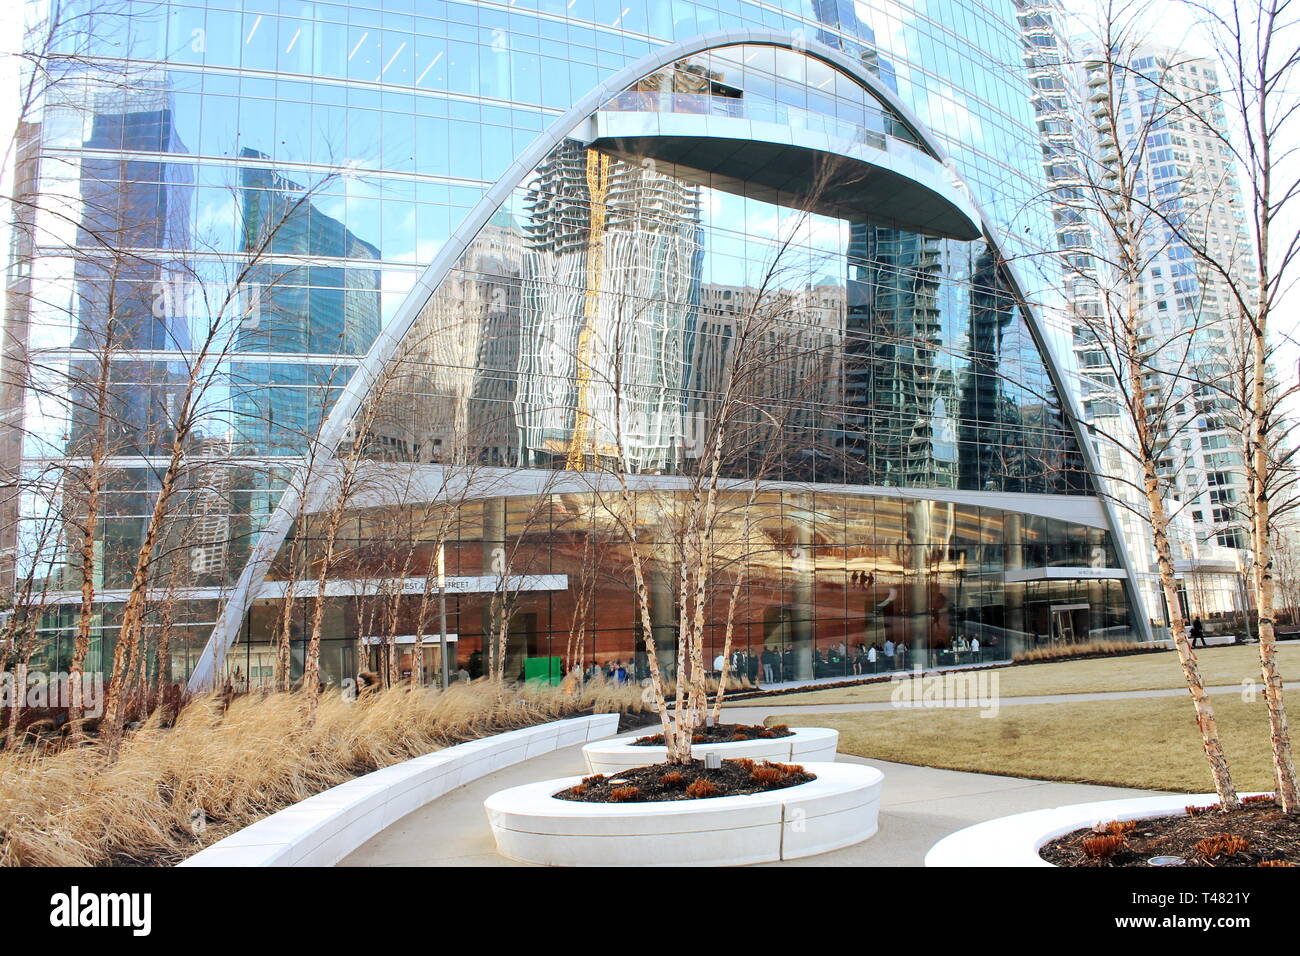 The lobby and park in front of 444 West lake street in Chicago, IL Stock Photo